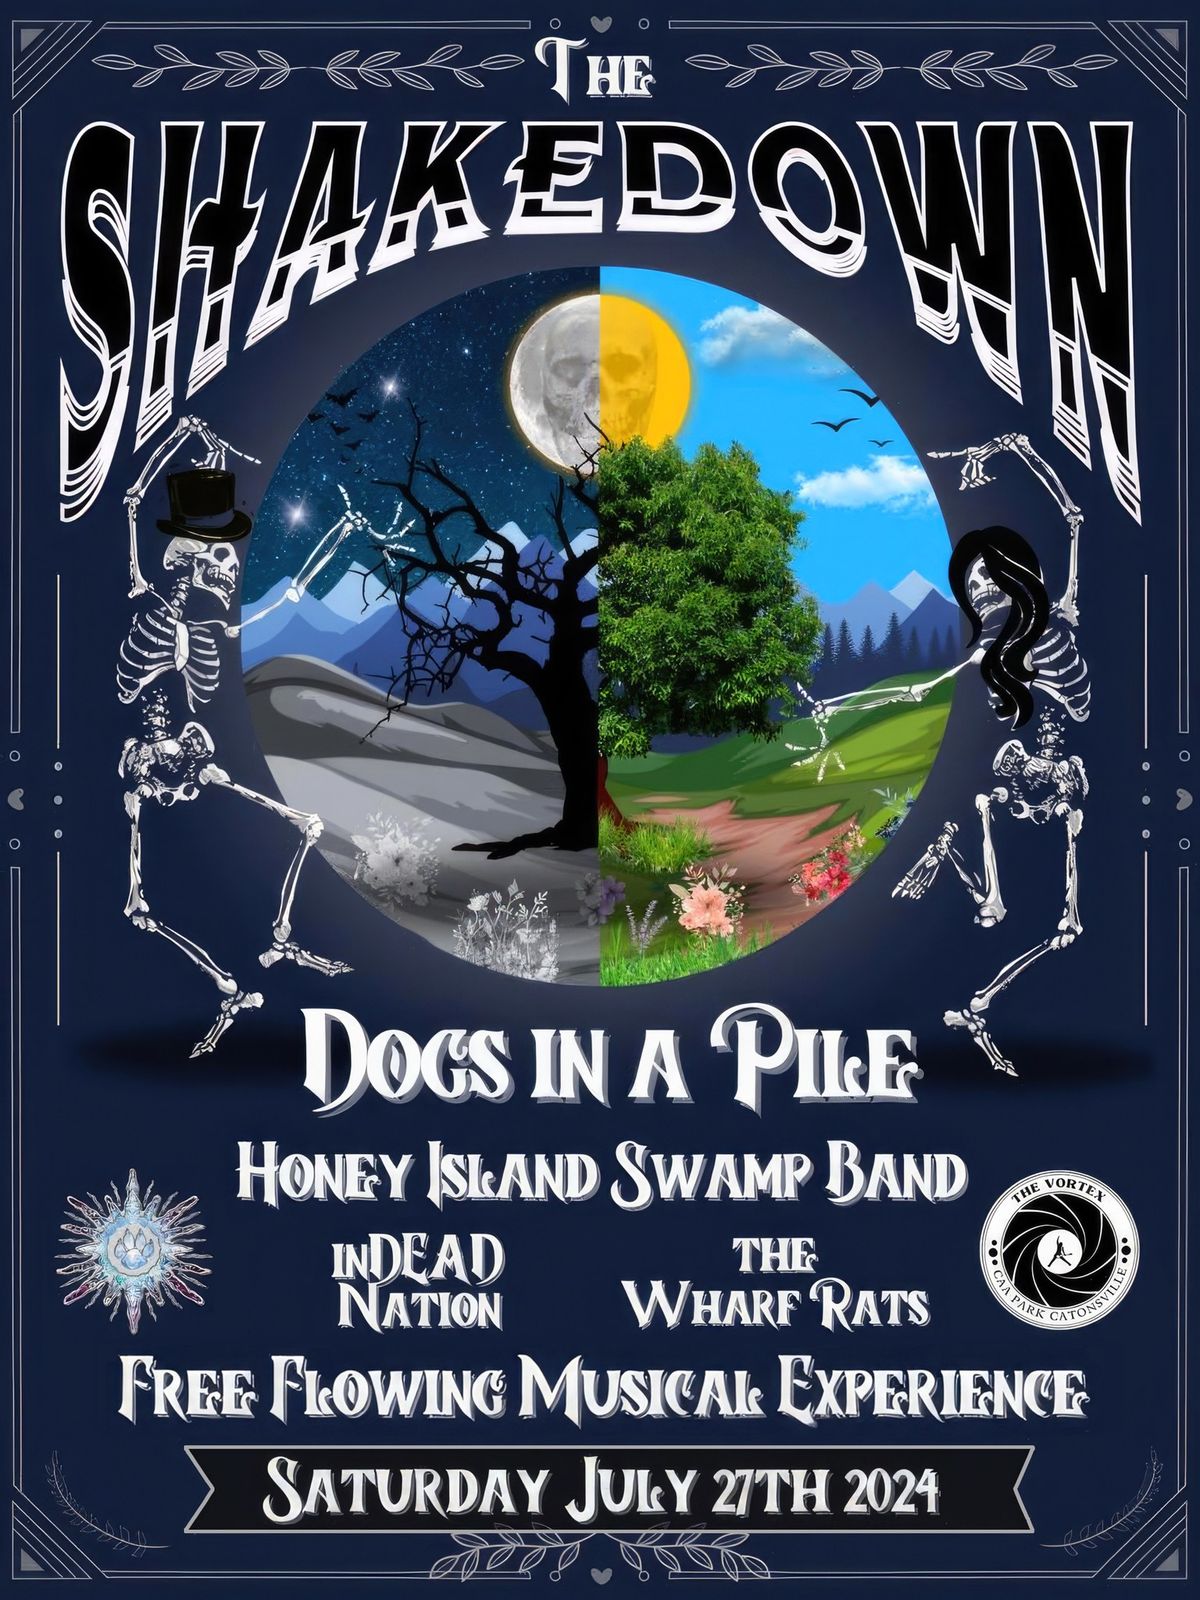 FFME @ "The Shakedown" Music Festival. Sat, July 27th. 1-9:30 PM (FFME at 2:30 PM). Catonsville, MD